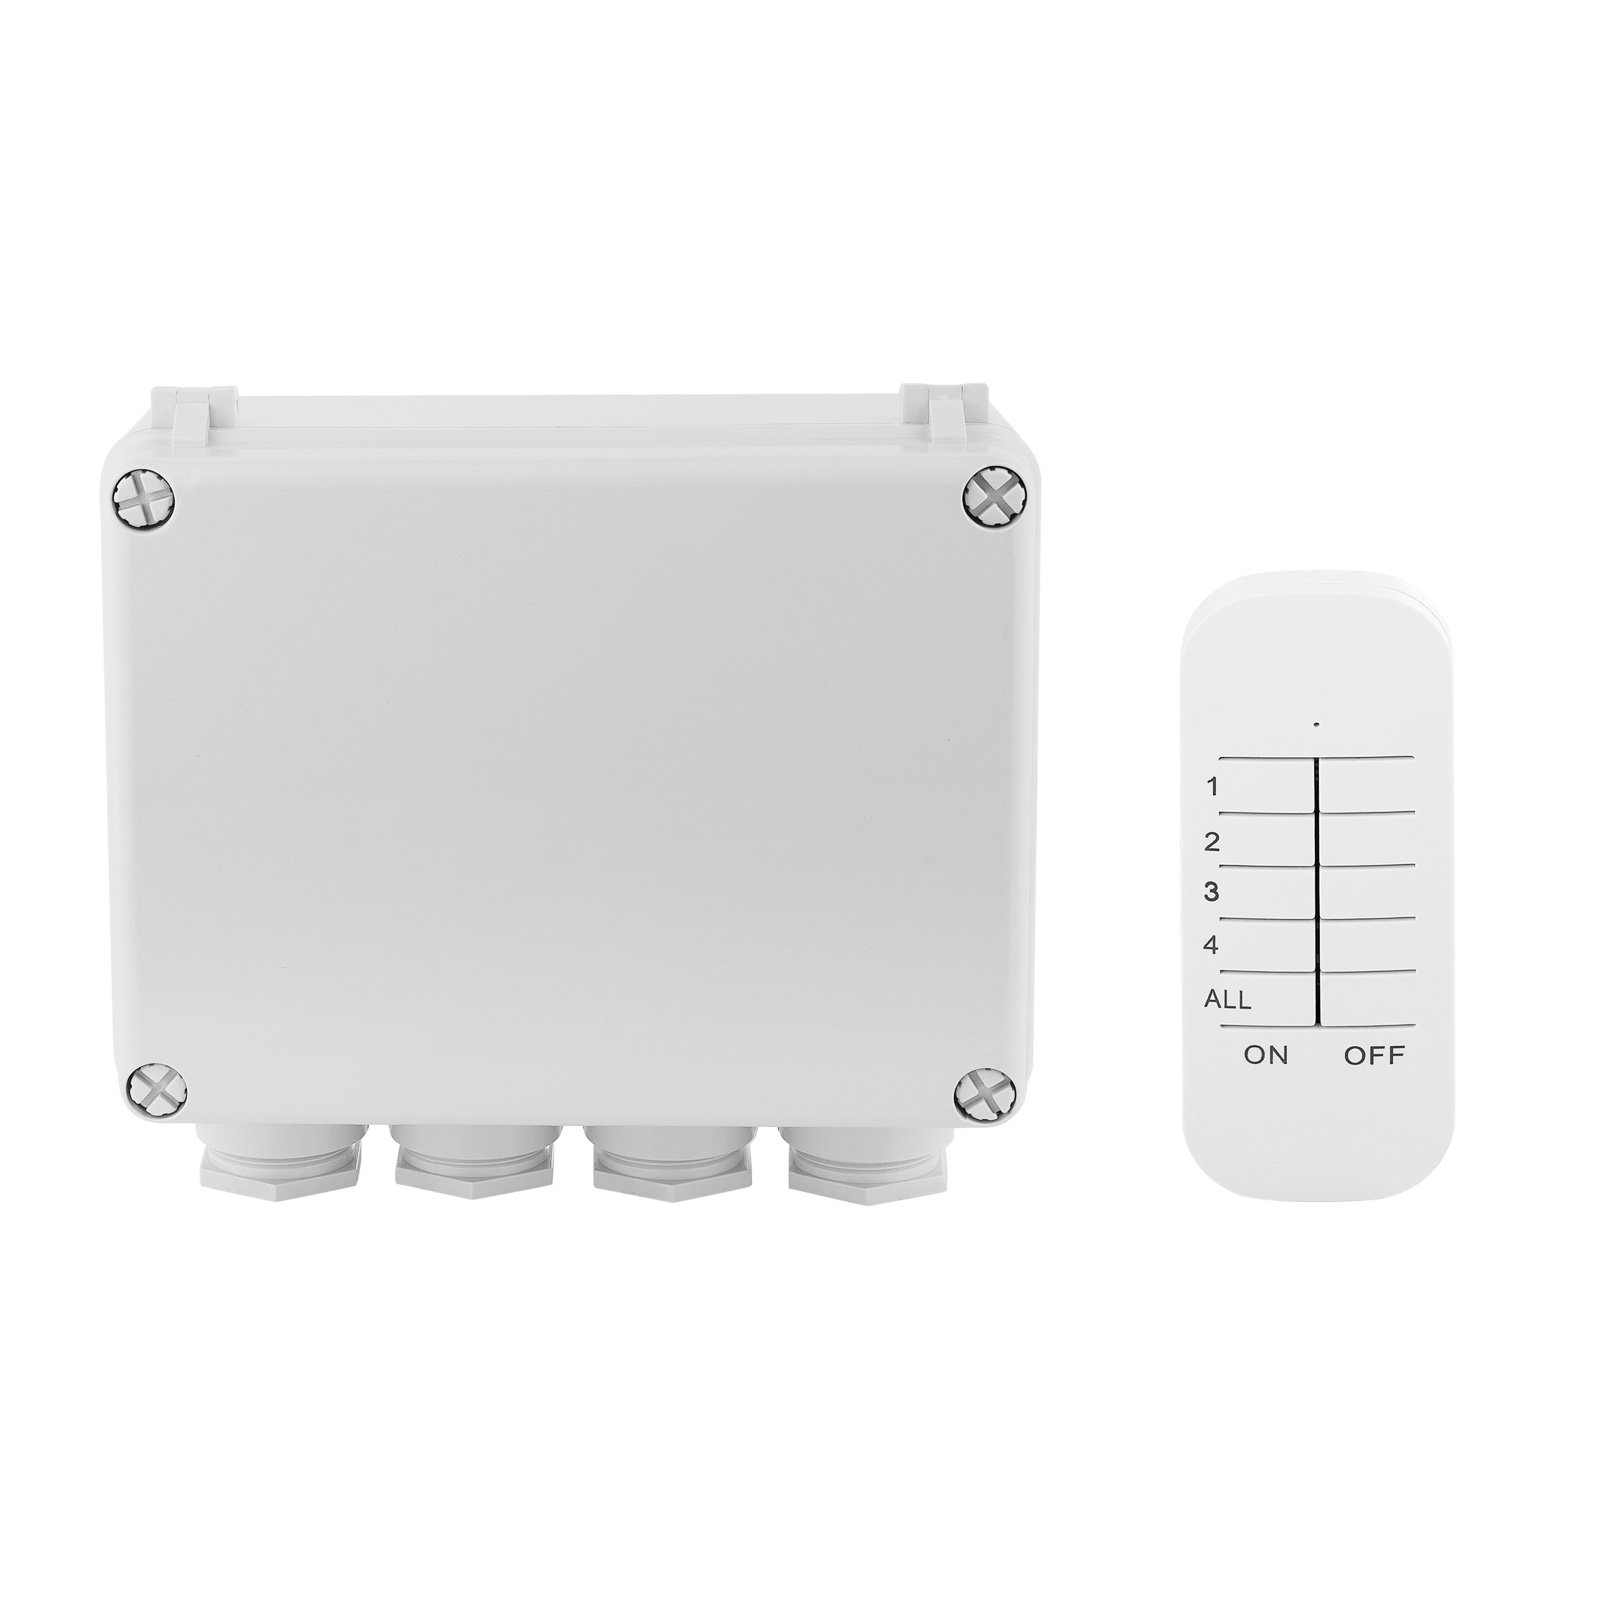 3-channel switch box SH4-99652, outdoor area